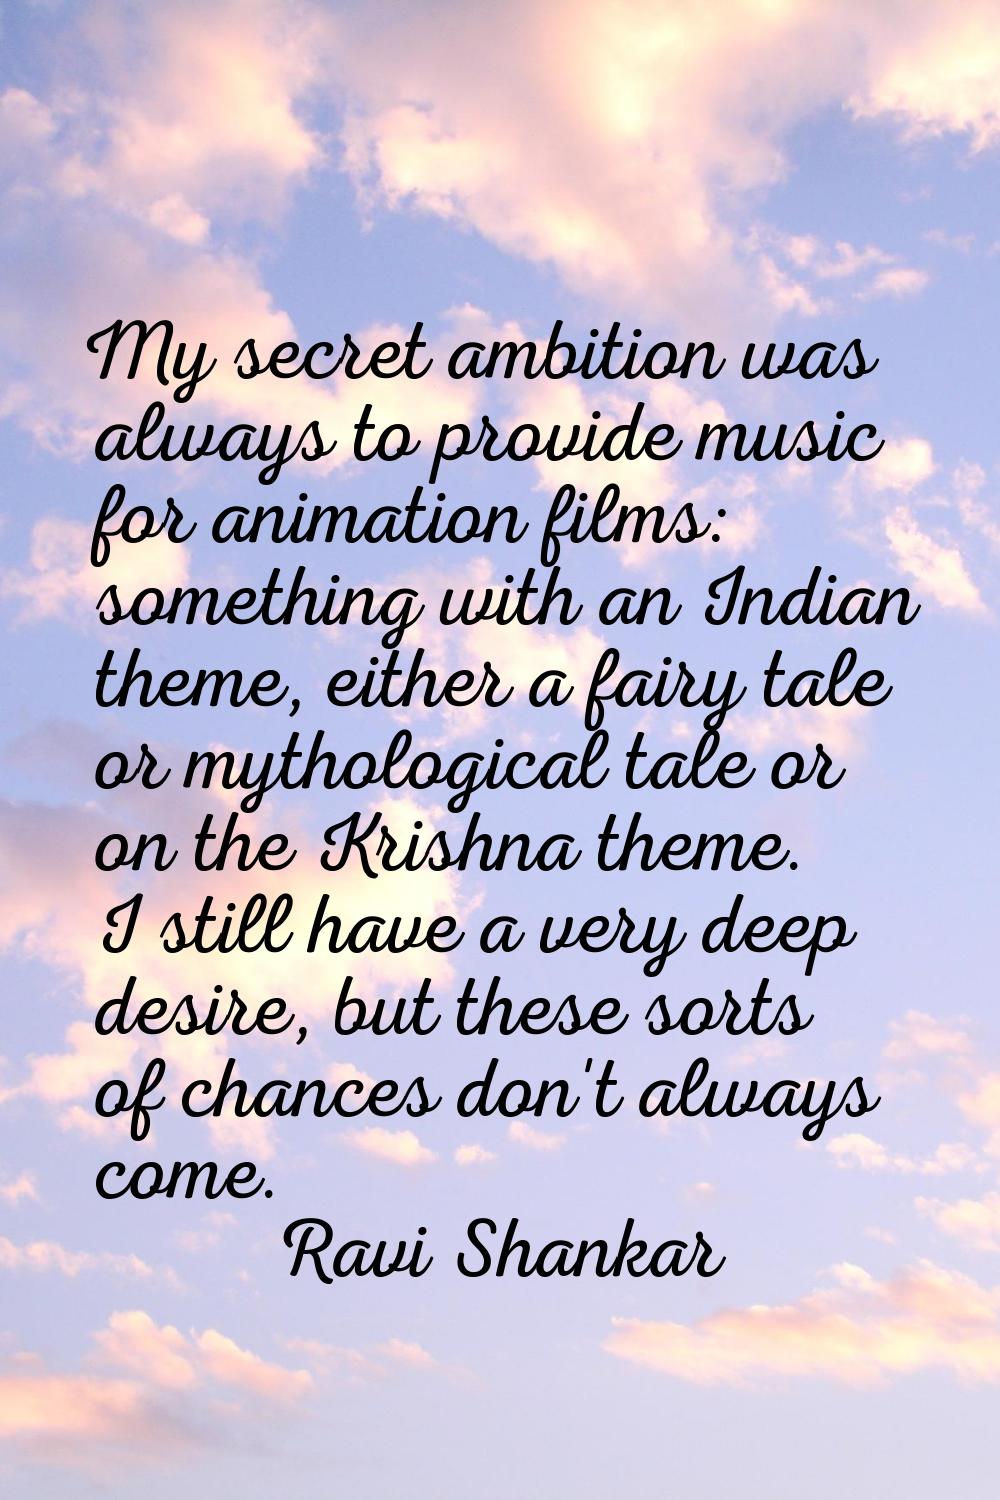 My secret ambition was always to provide music for animation films: something with an Indian theme,